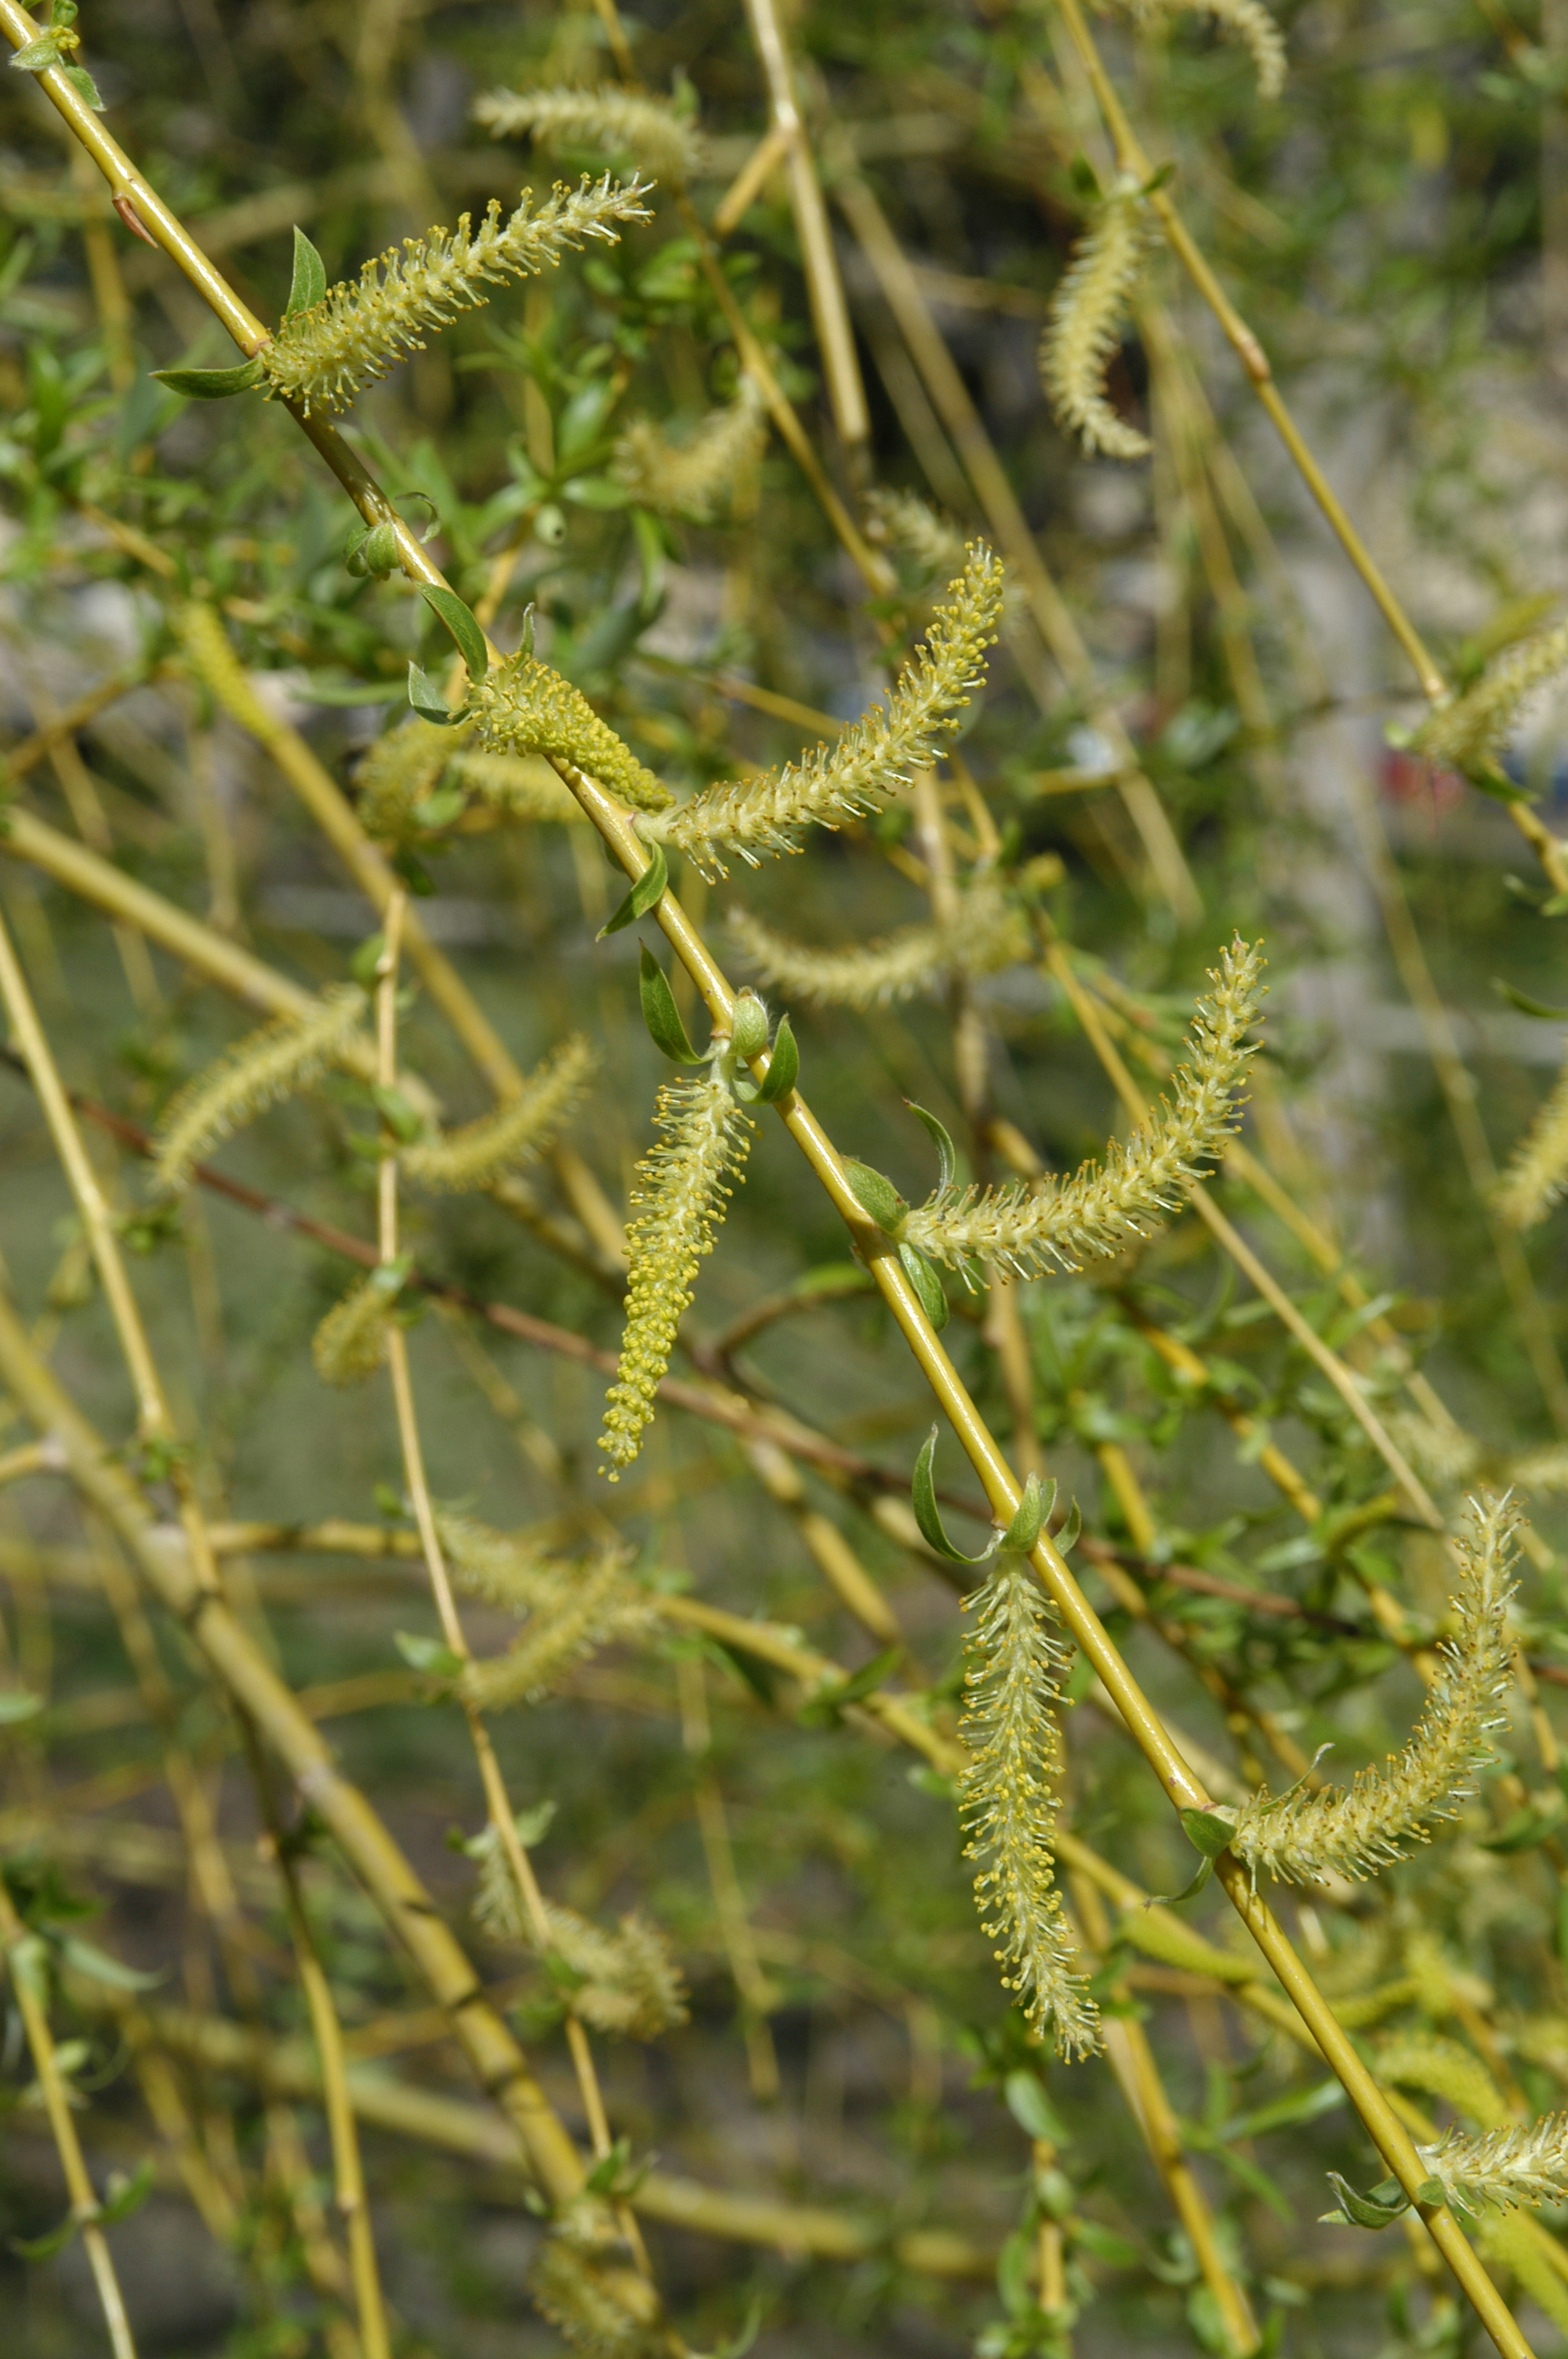 Willow flowers (catkins)